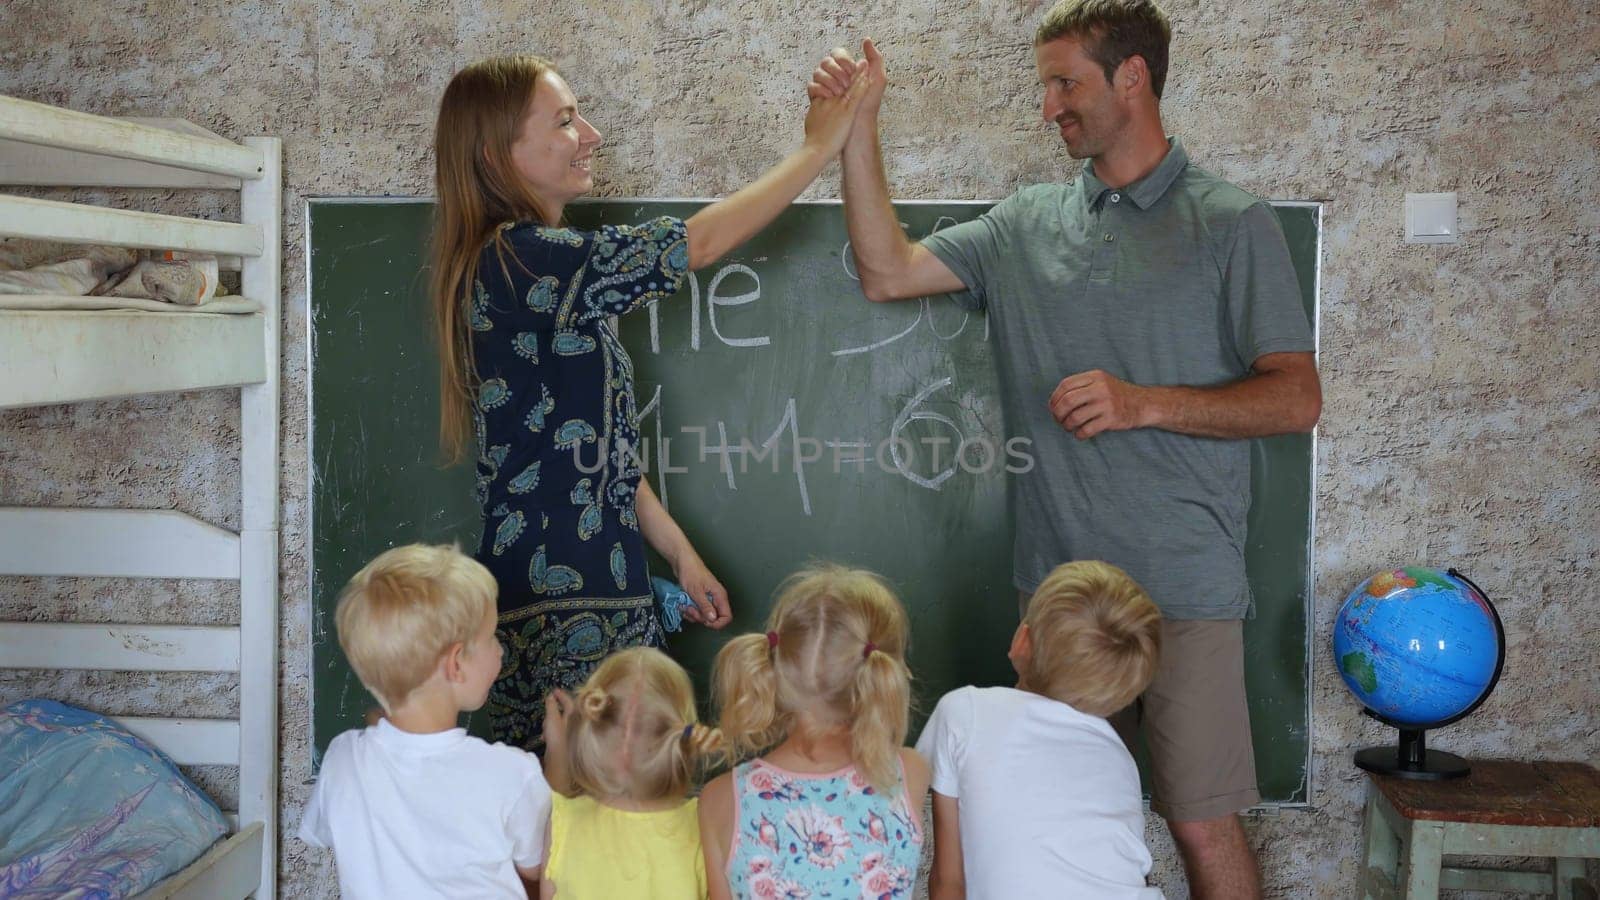 Home school concept. Parents give children a math lesson at the blackboard